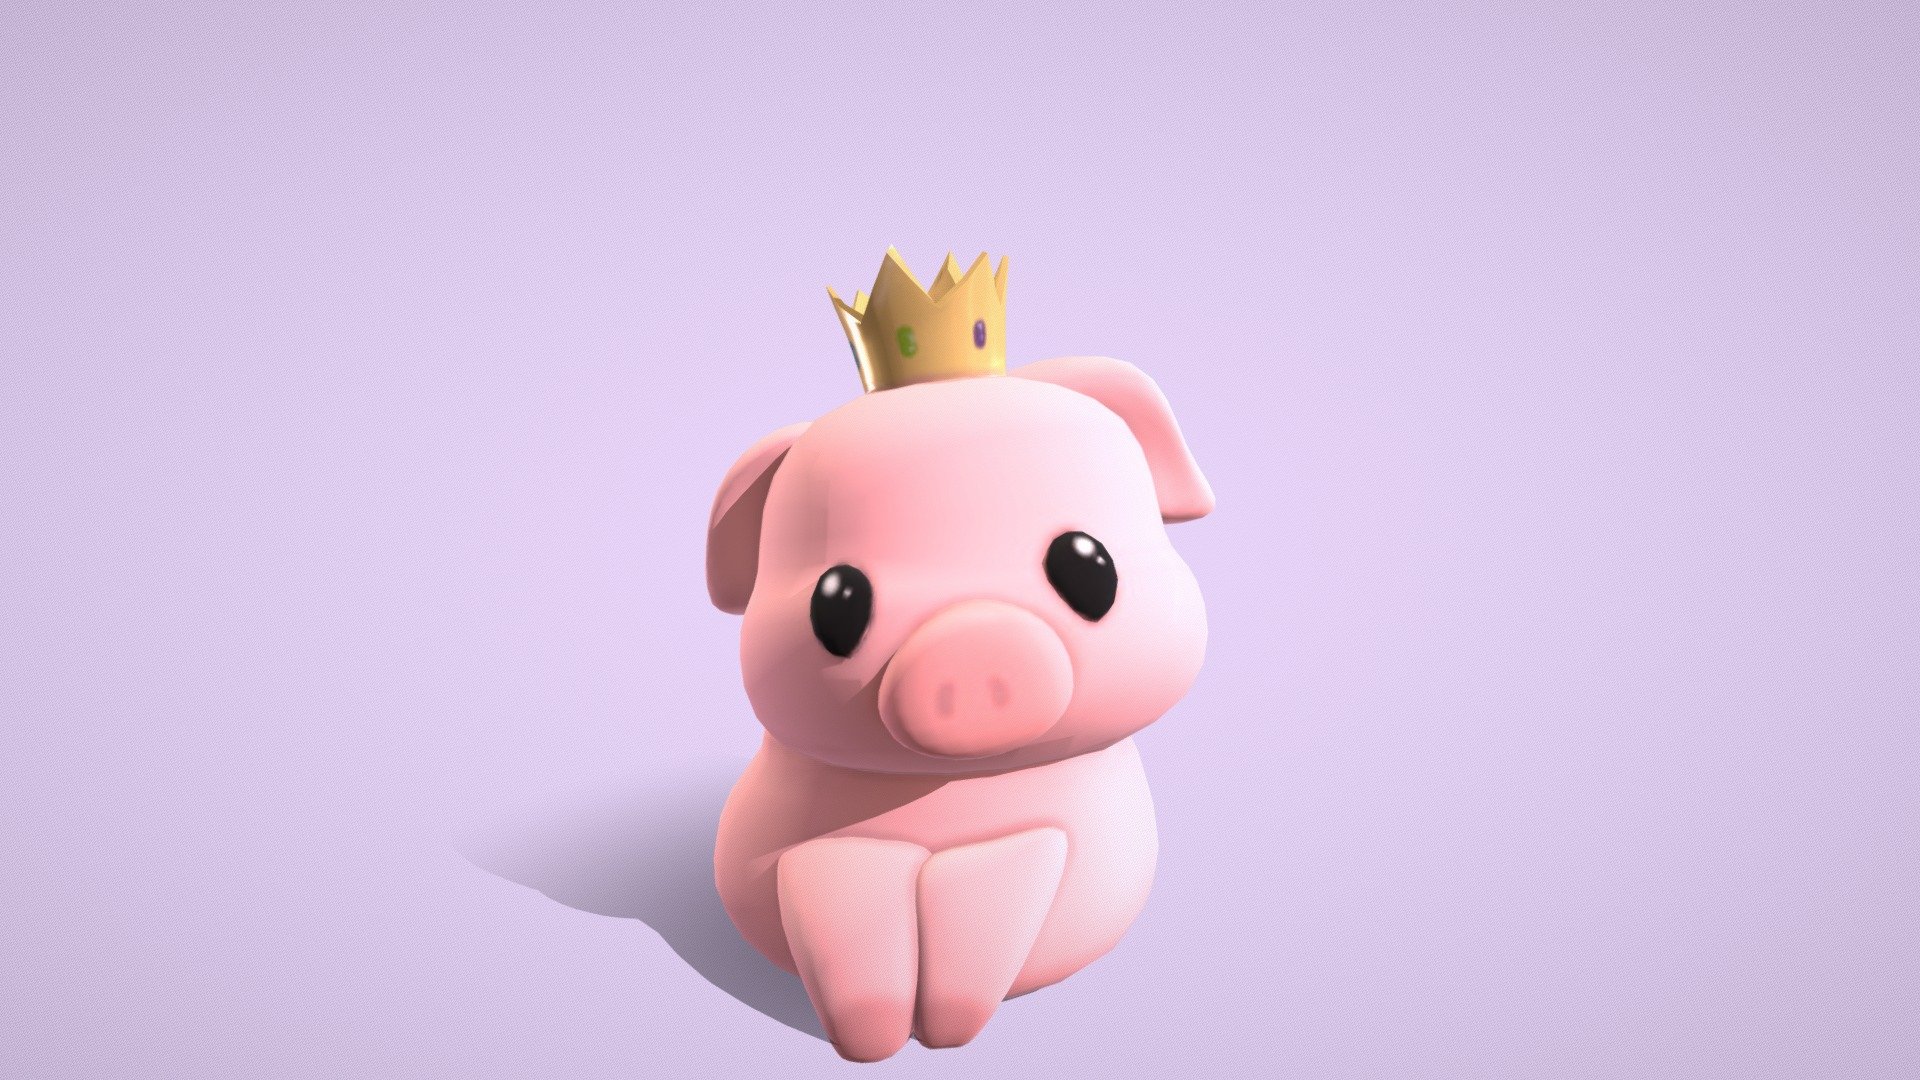 Small low poly model using PBR textures. 
software: -Maya
                  -Zbrush
                  -Substance Painter - Piggie with crown - 3D model by Kim Baker (@Kim_Baker) 3d model